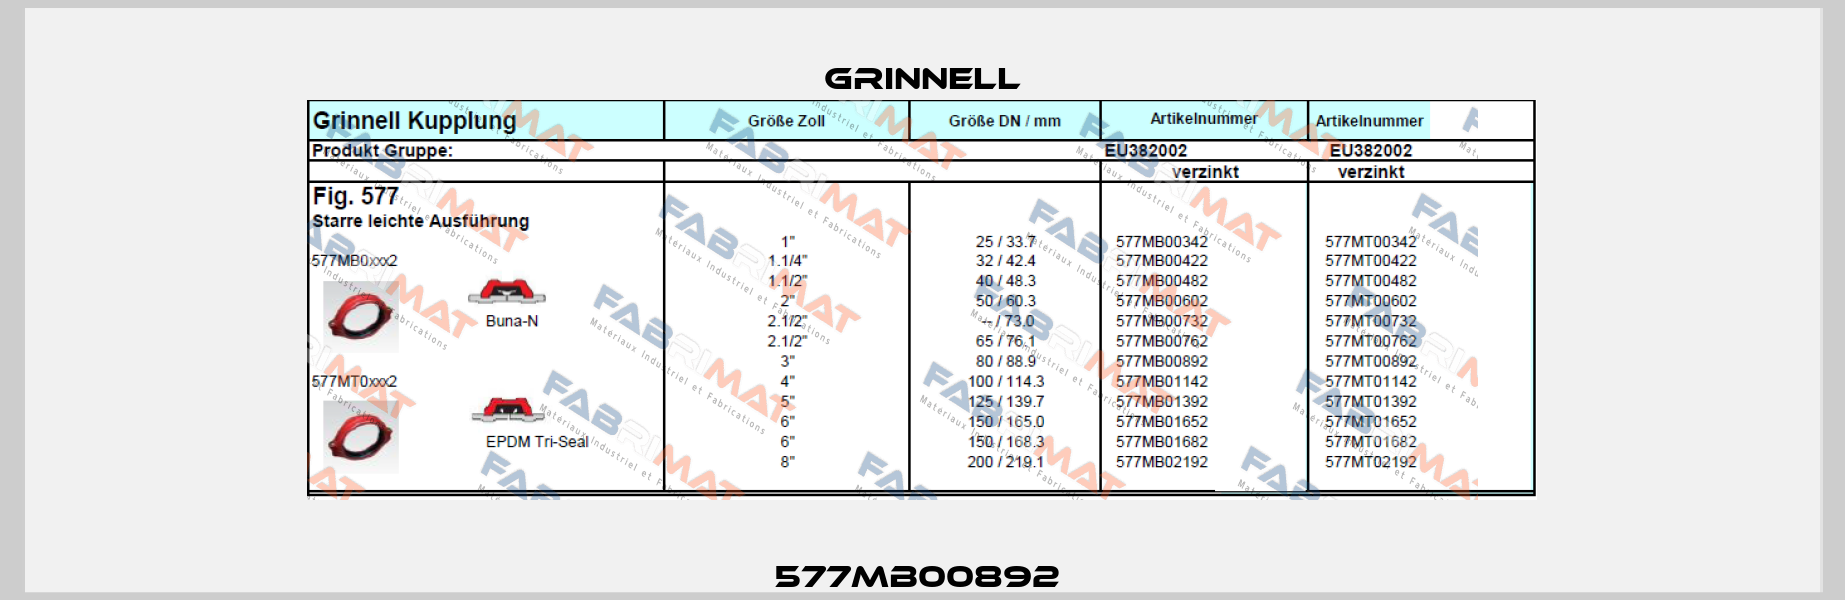 577MB00892  Grinnell